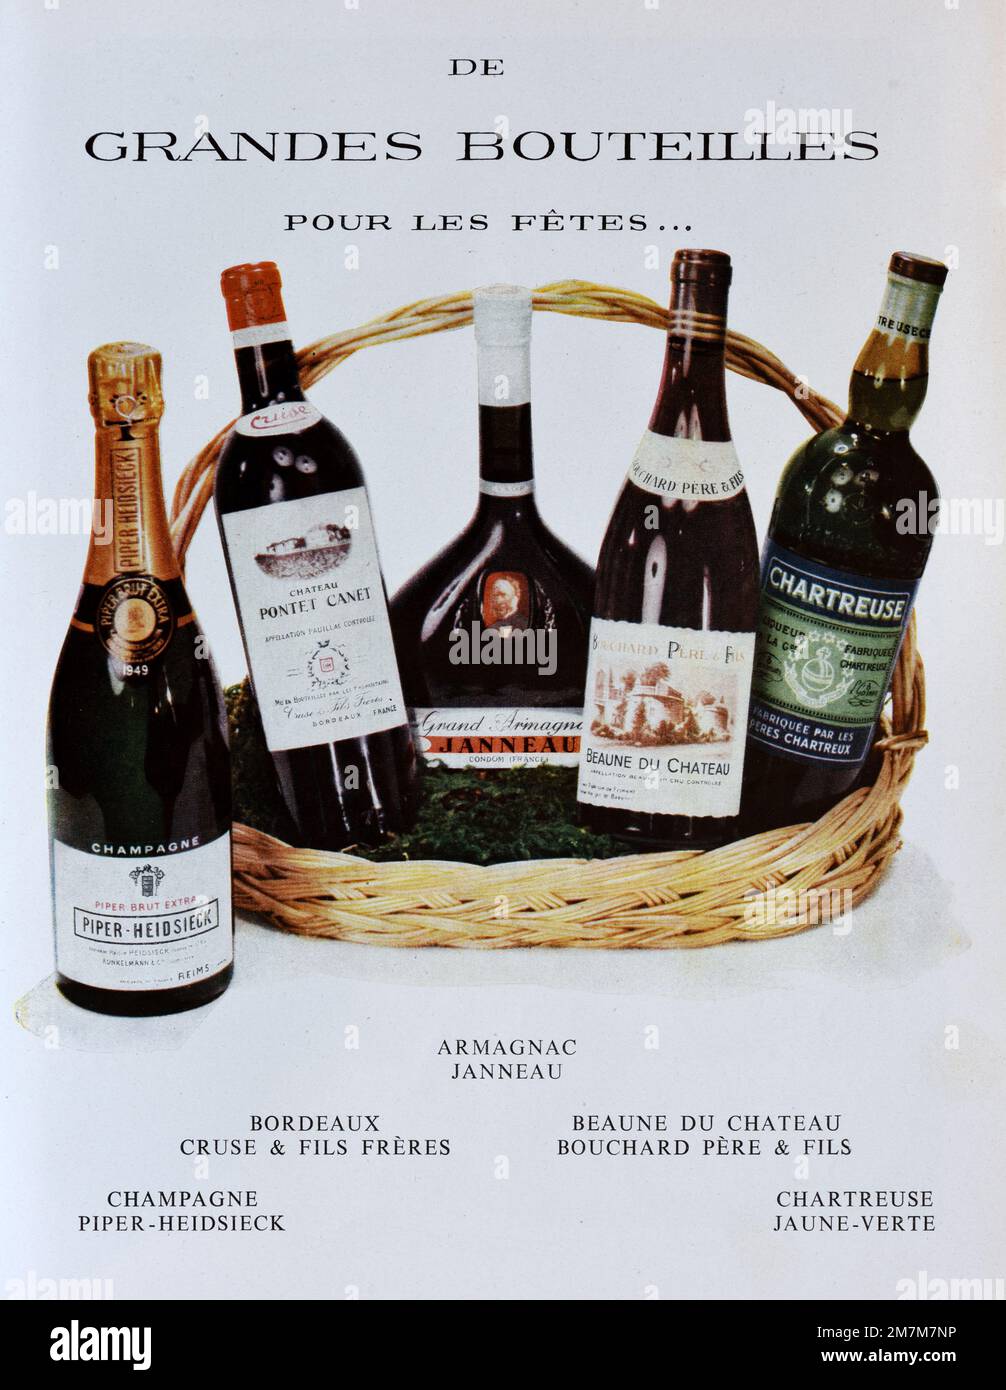 Vintage or Old Advert, Advertisement, Publicity or Illustration for Fine Wines, Grandes Bouteilles or Grands Crus Presented in Wicker Basket 1956 French Advert Stock Photo